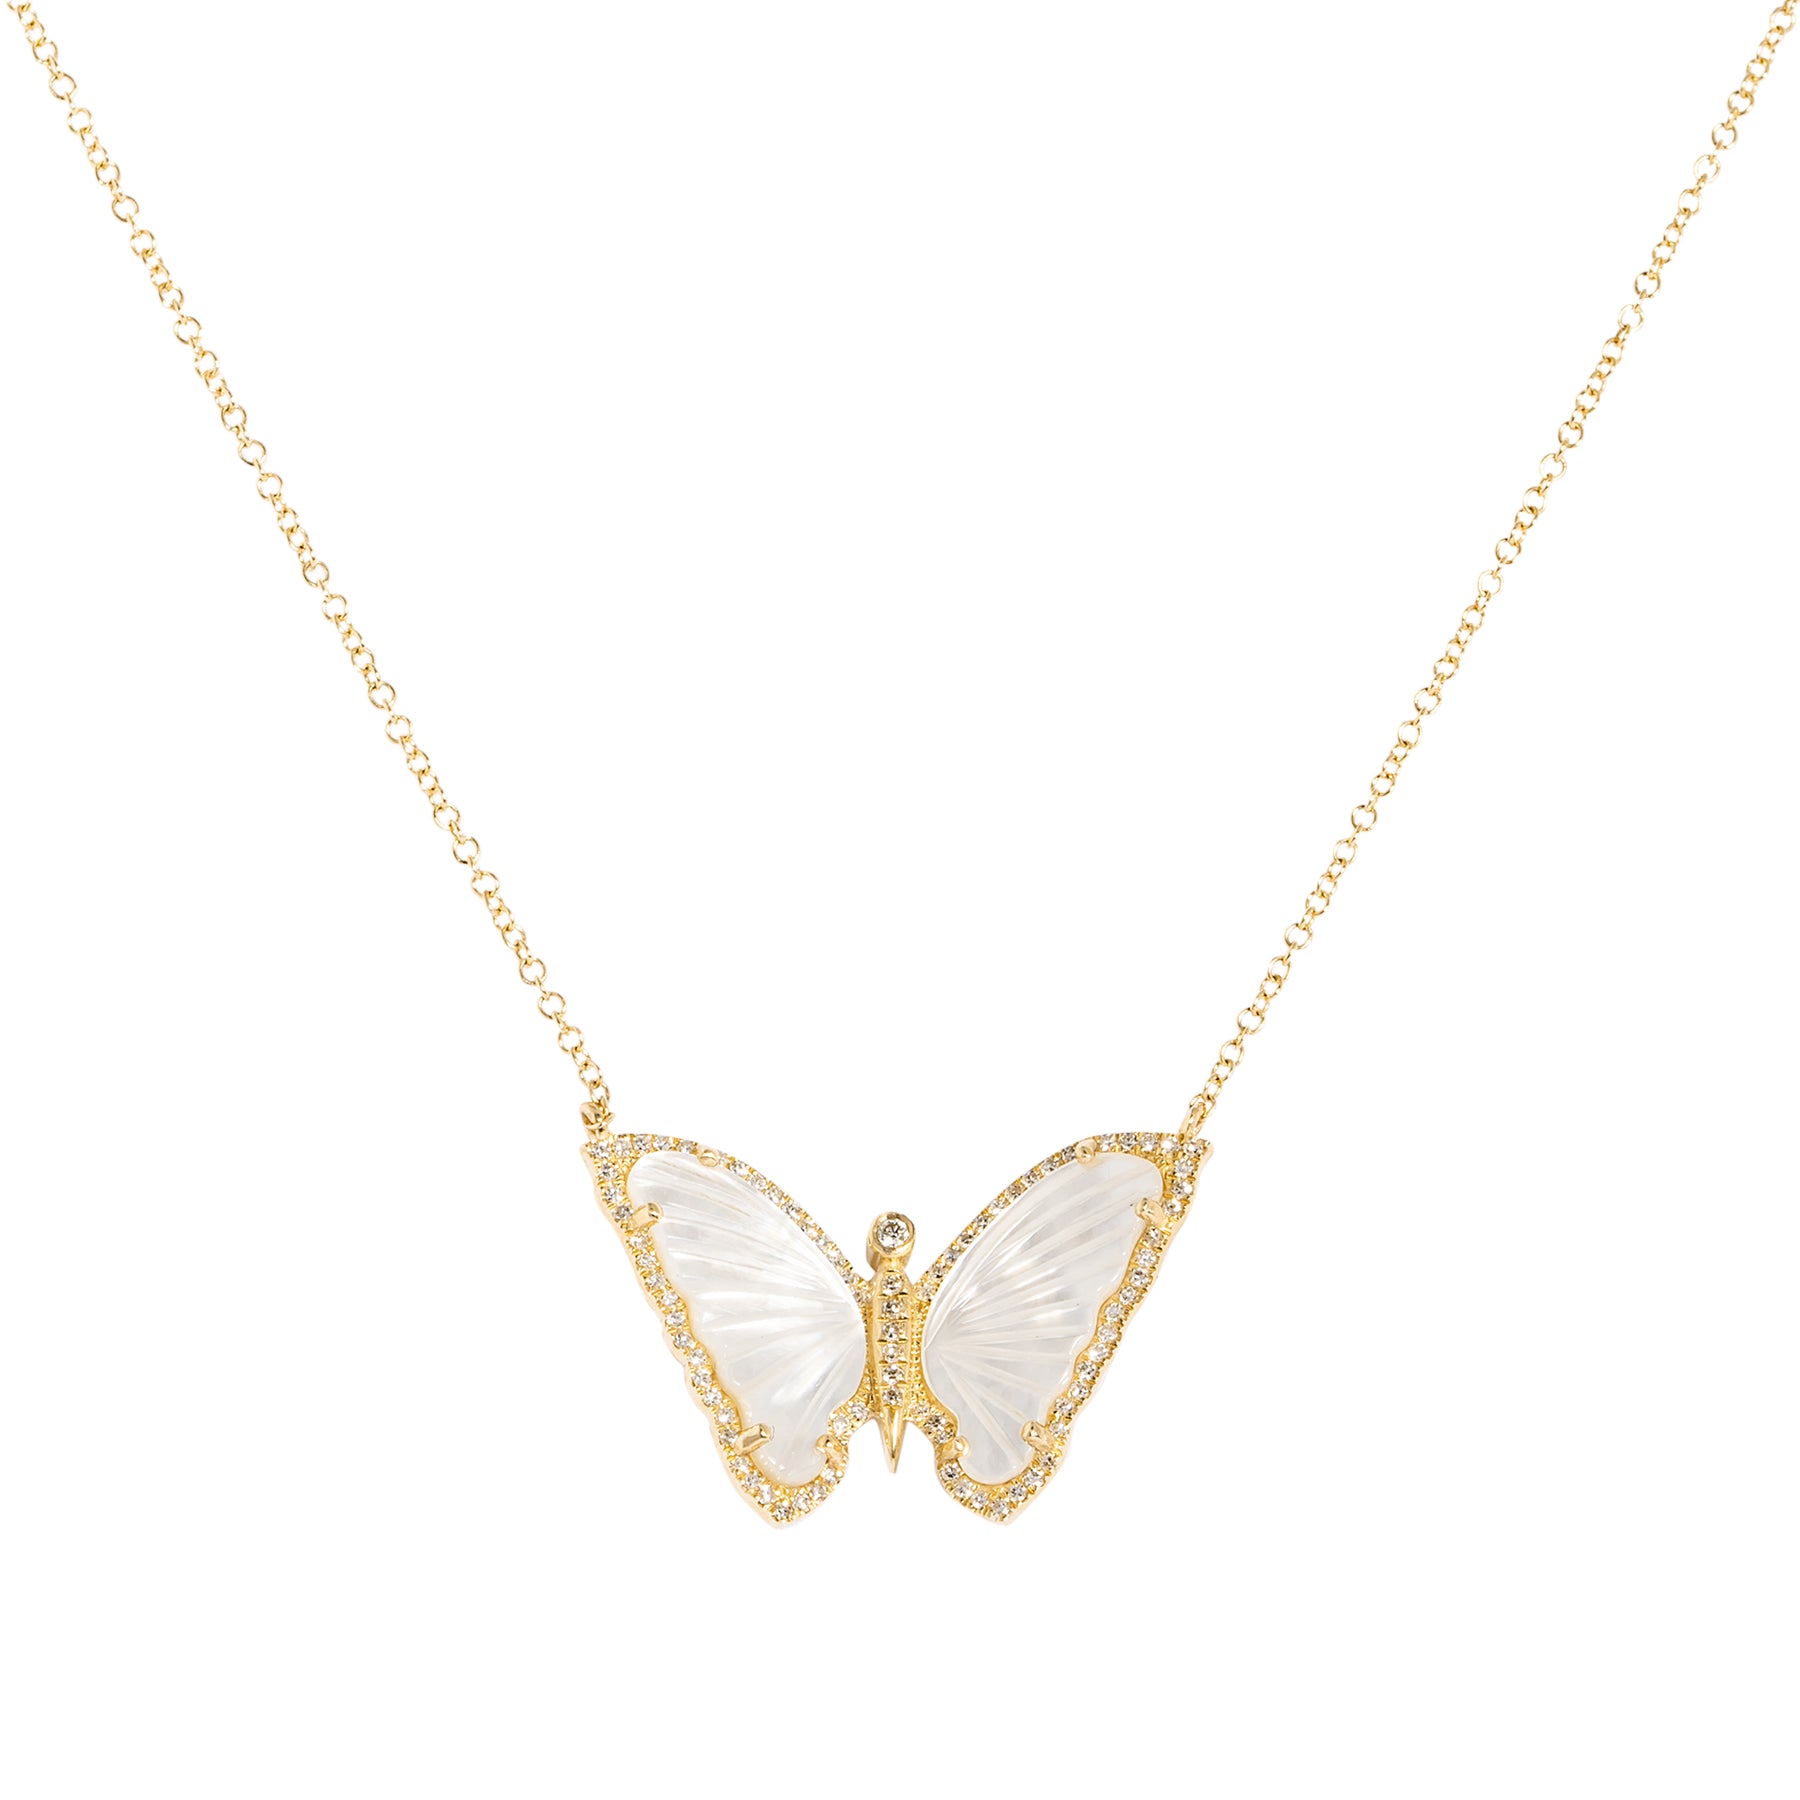 Mother of Pearl Butterfly Diamond Necklace - Nina Segal Jewelry